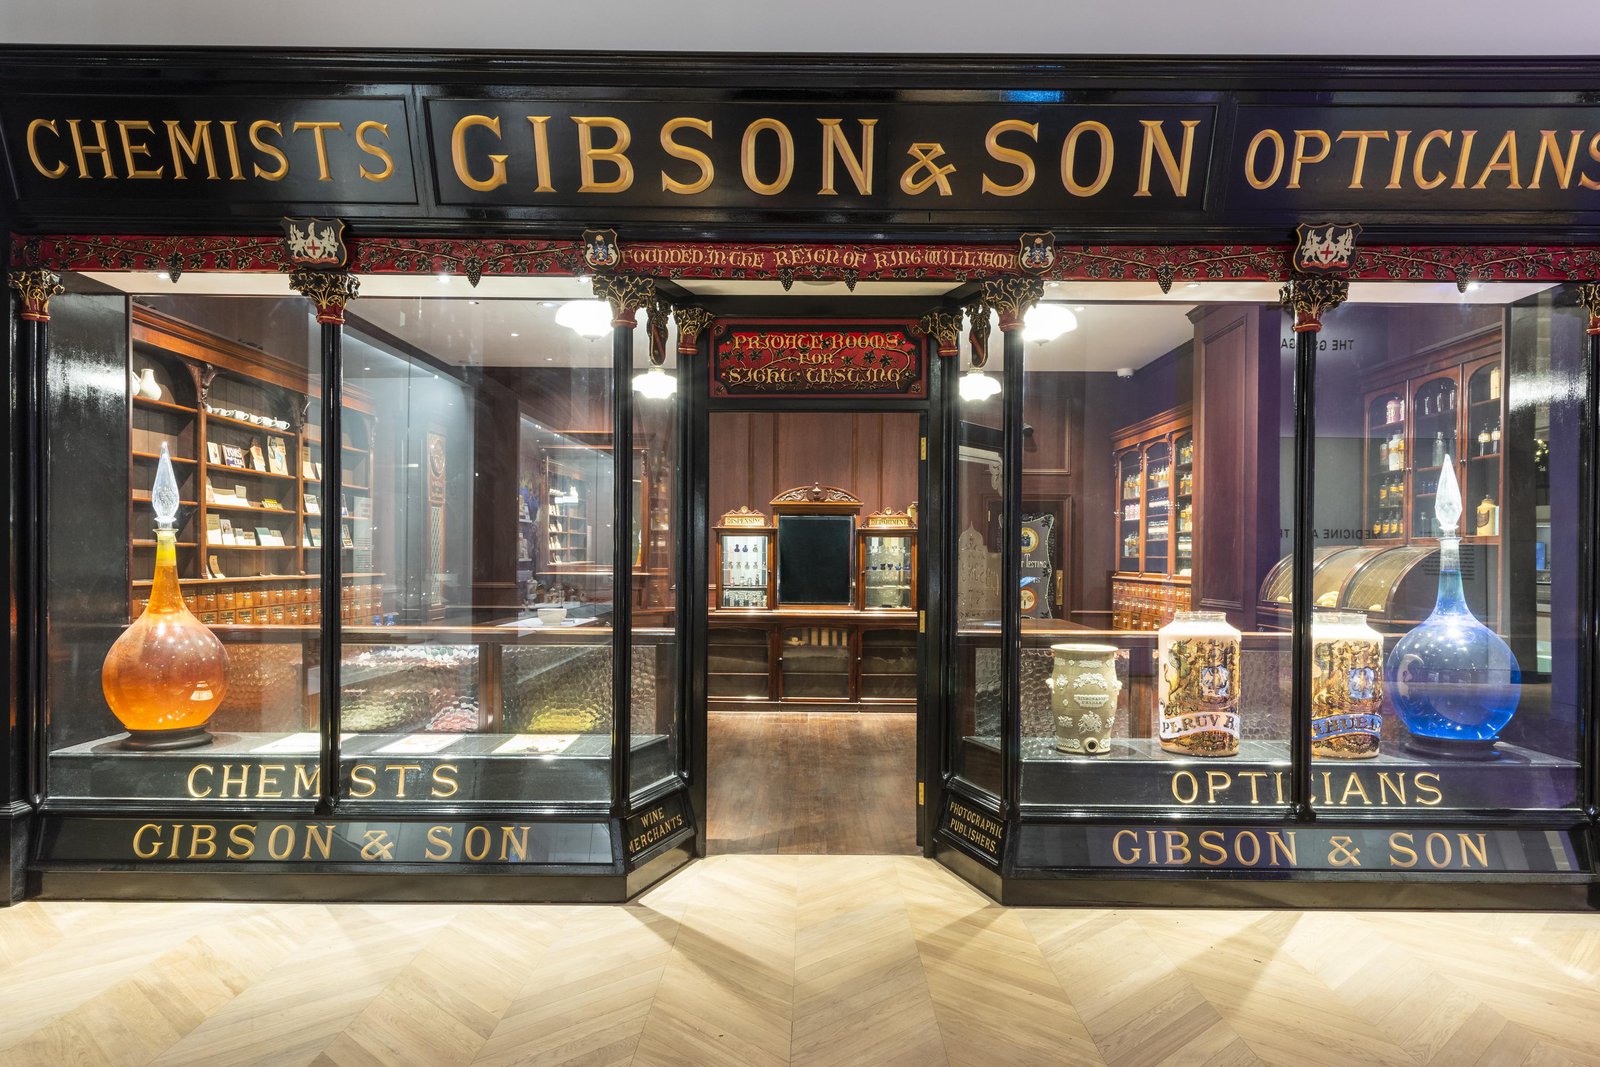 Mr Gibson's Pharmacy in the Medicine and Treatments gallery © Science Museum Group